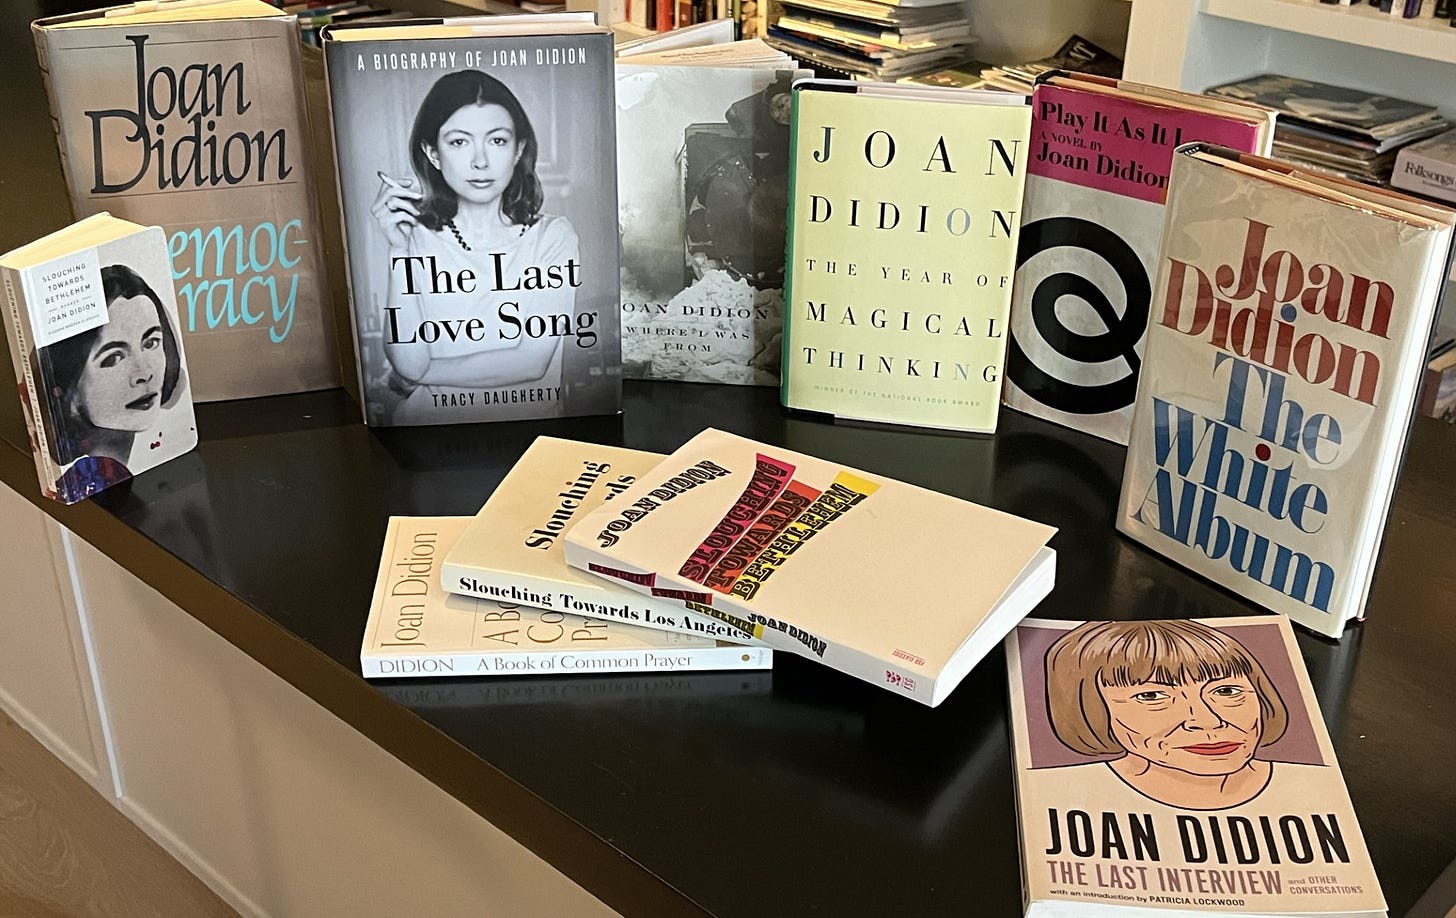 Books by and about Joan Didion